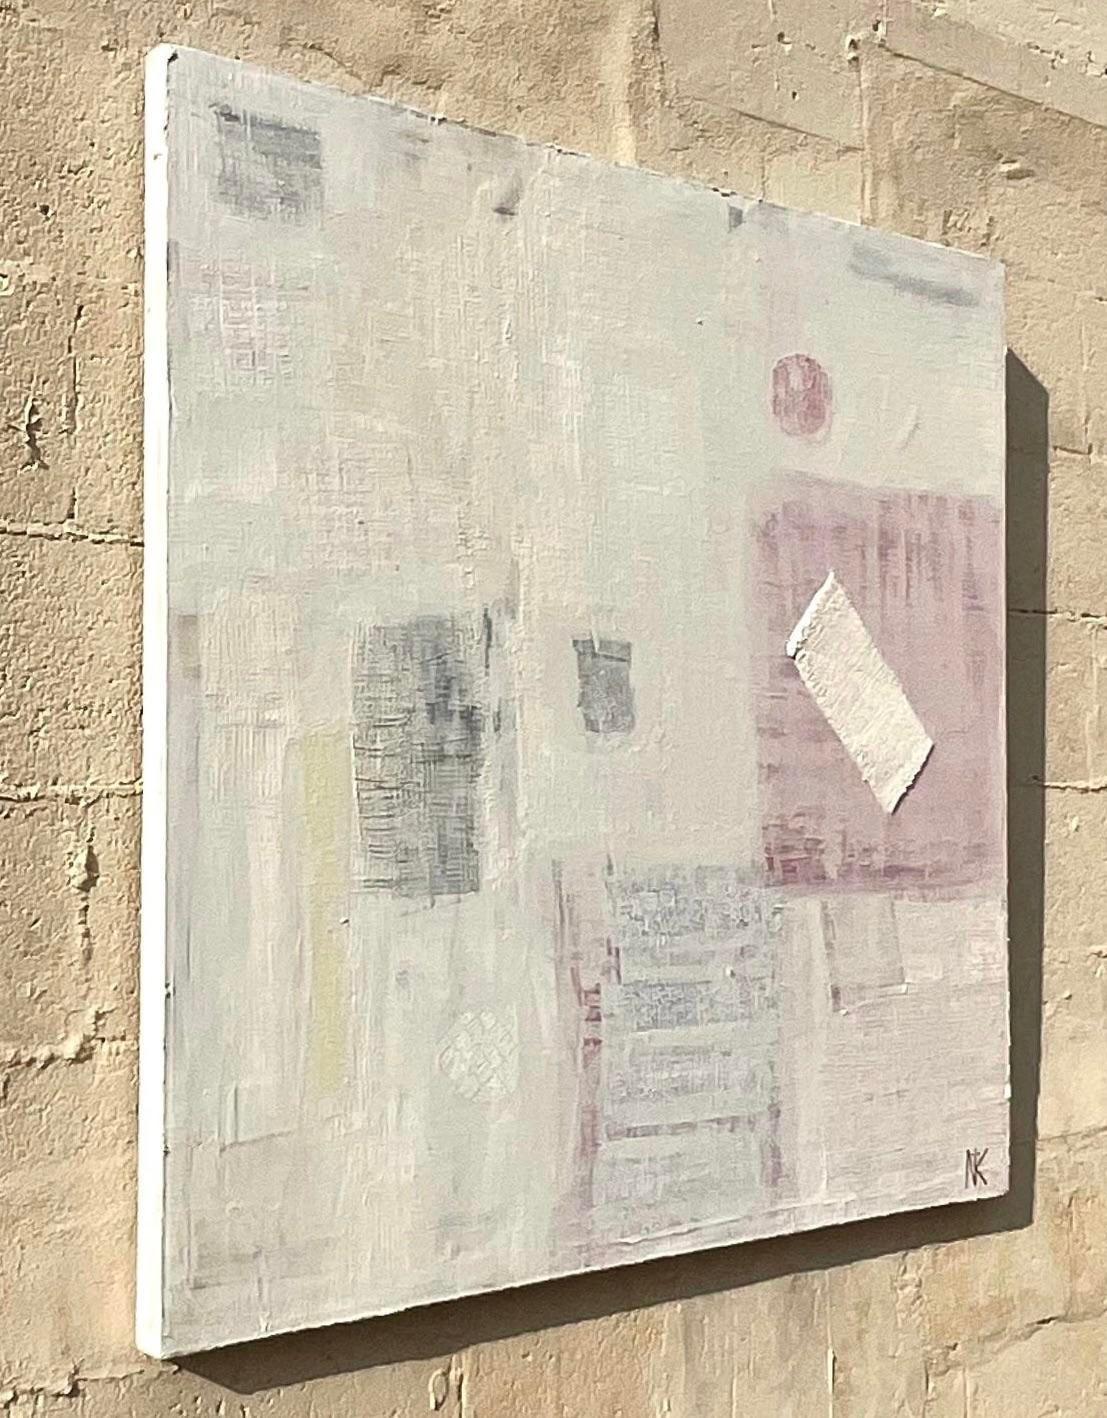 A brilliant vintage Contemporary Original painting on canvas. A chic Abstract composition in pale cool colors. Signed by the artist NK. Acquired from a Palm Beach estate.